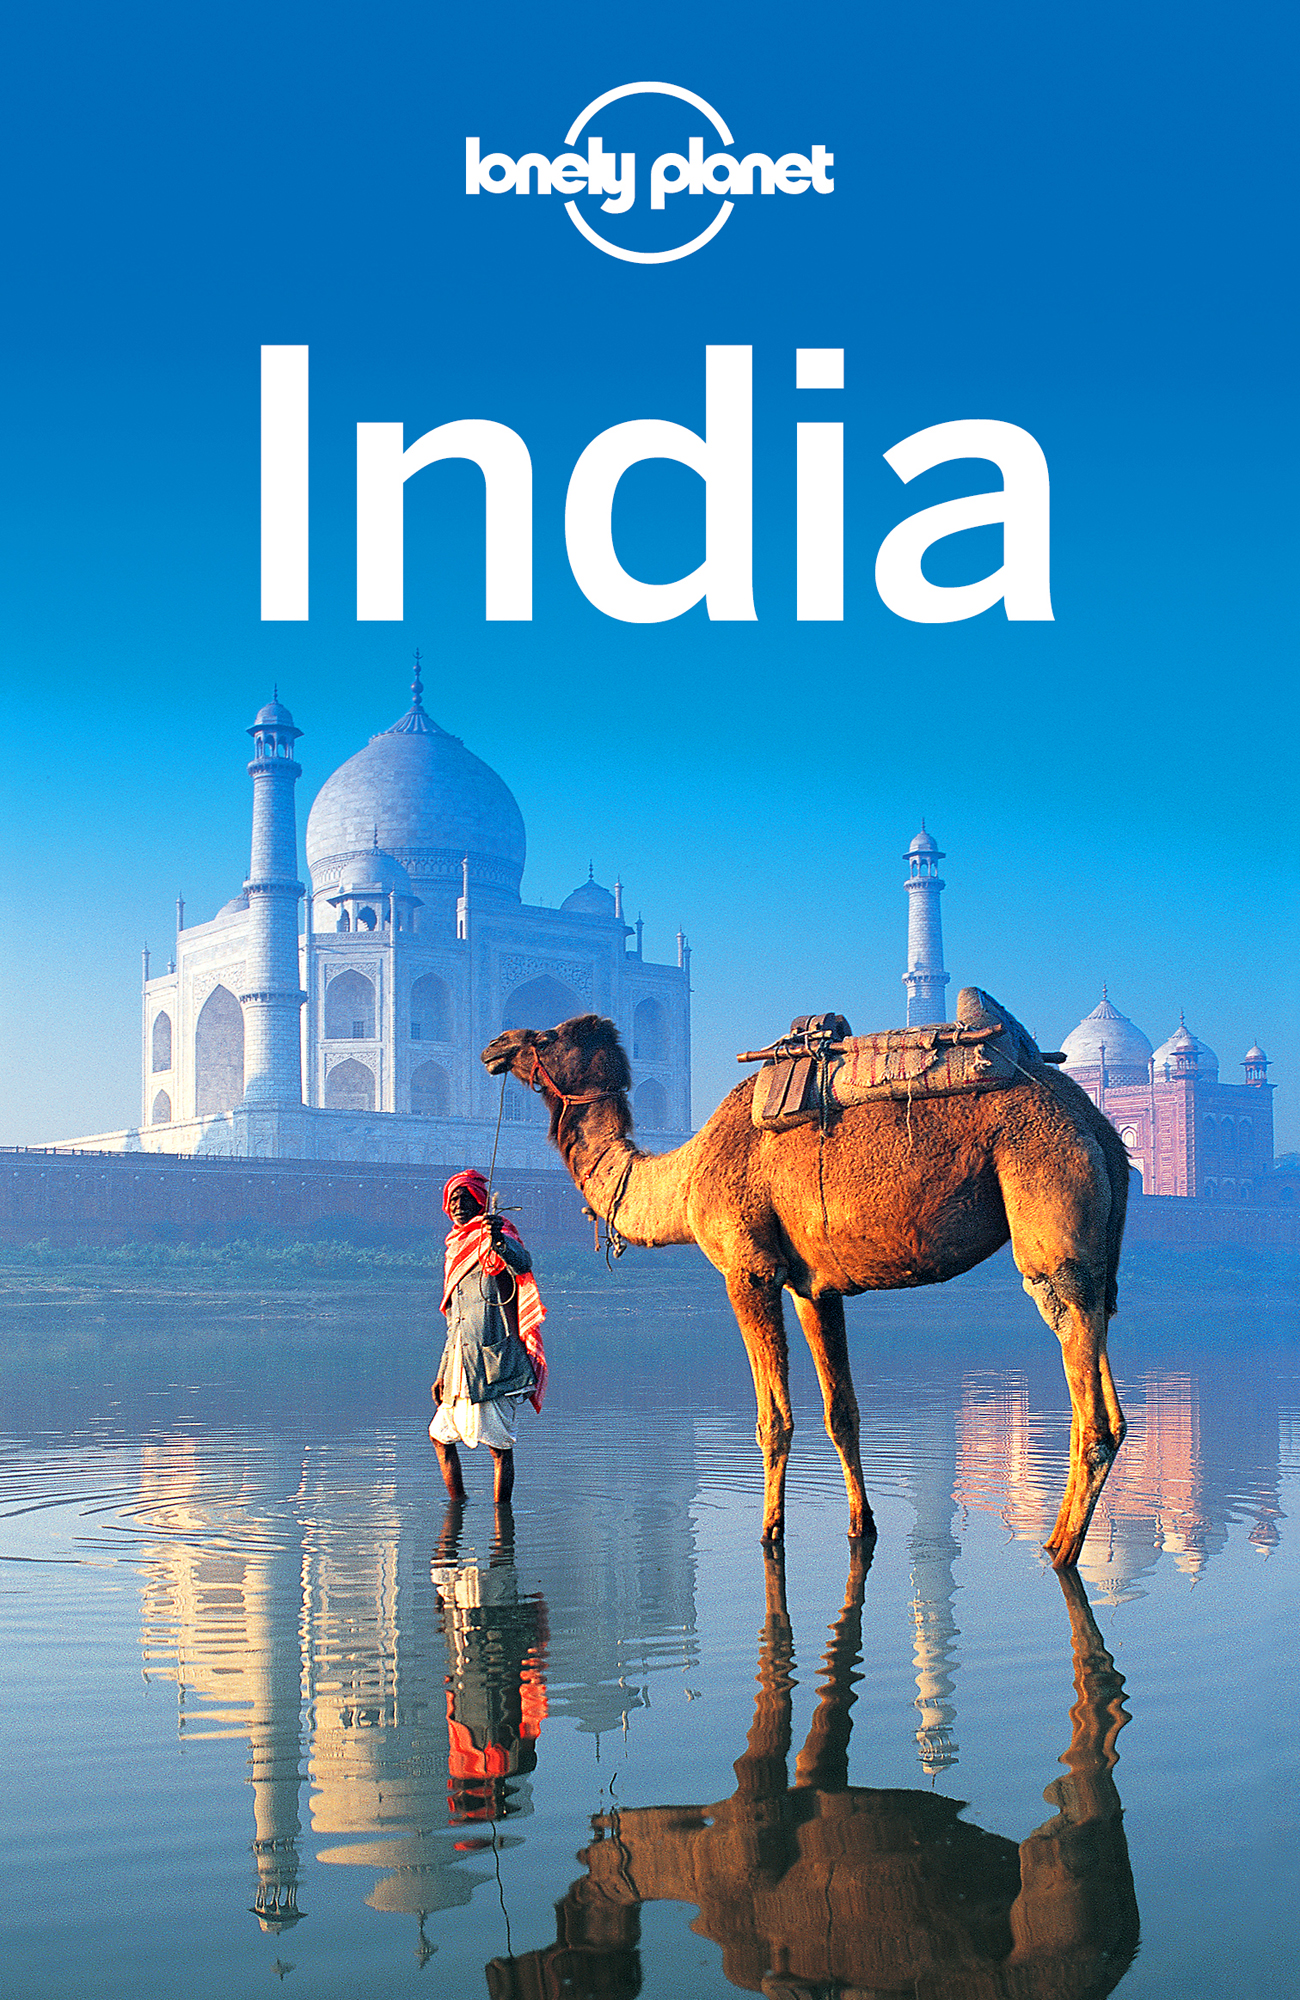 India Travel Guide - image 1